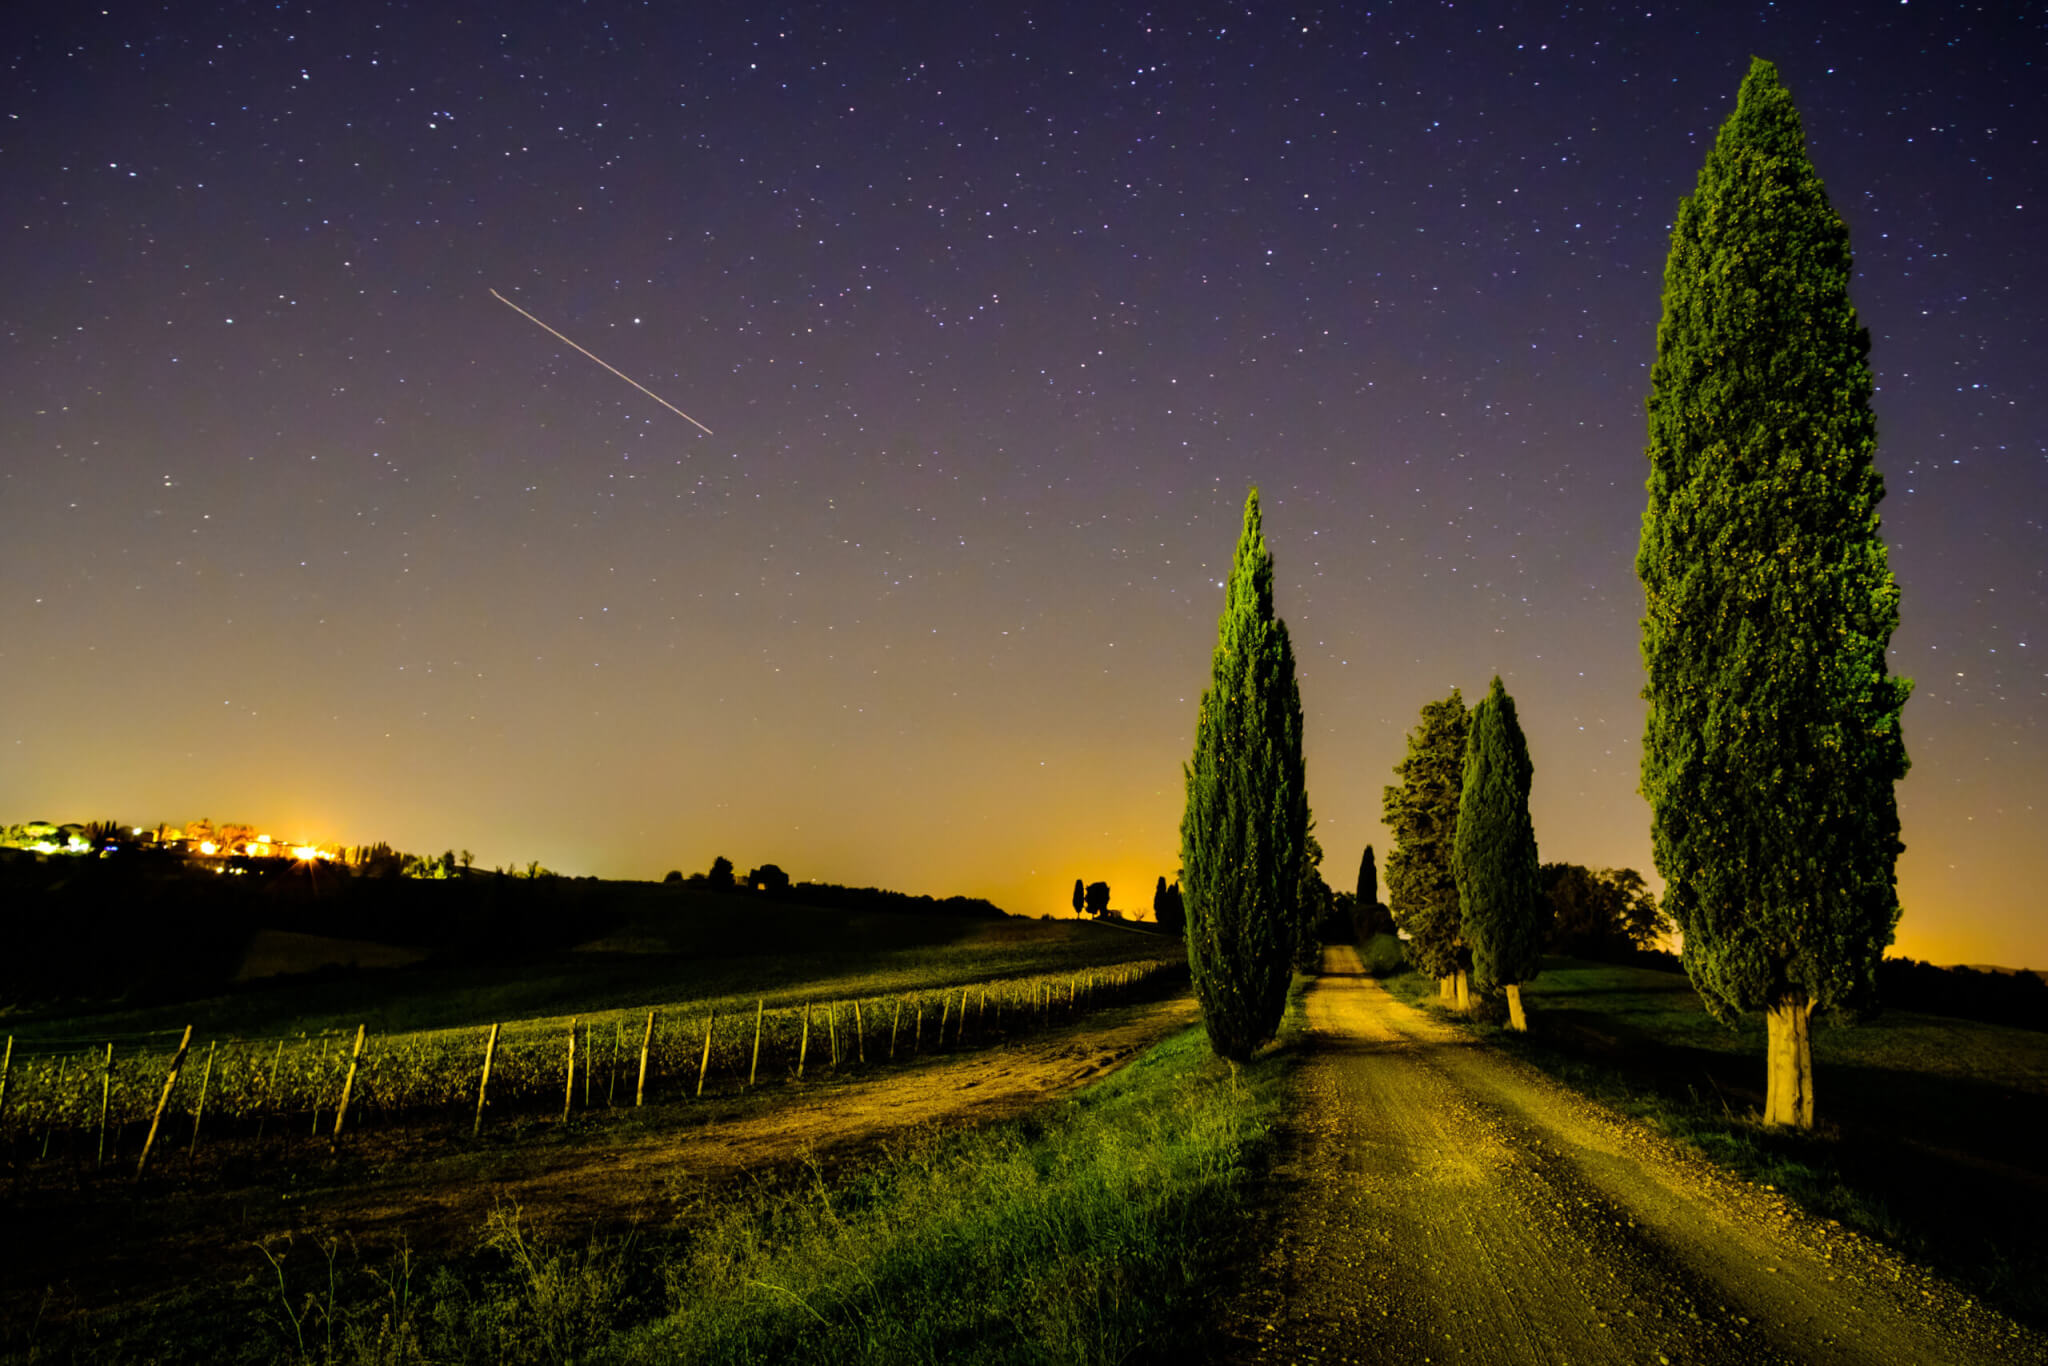 View of Tuscany vineyard and country road with shooting star in the sky